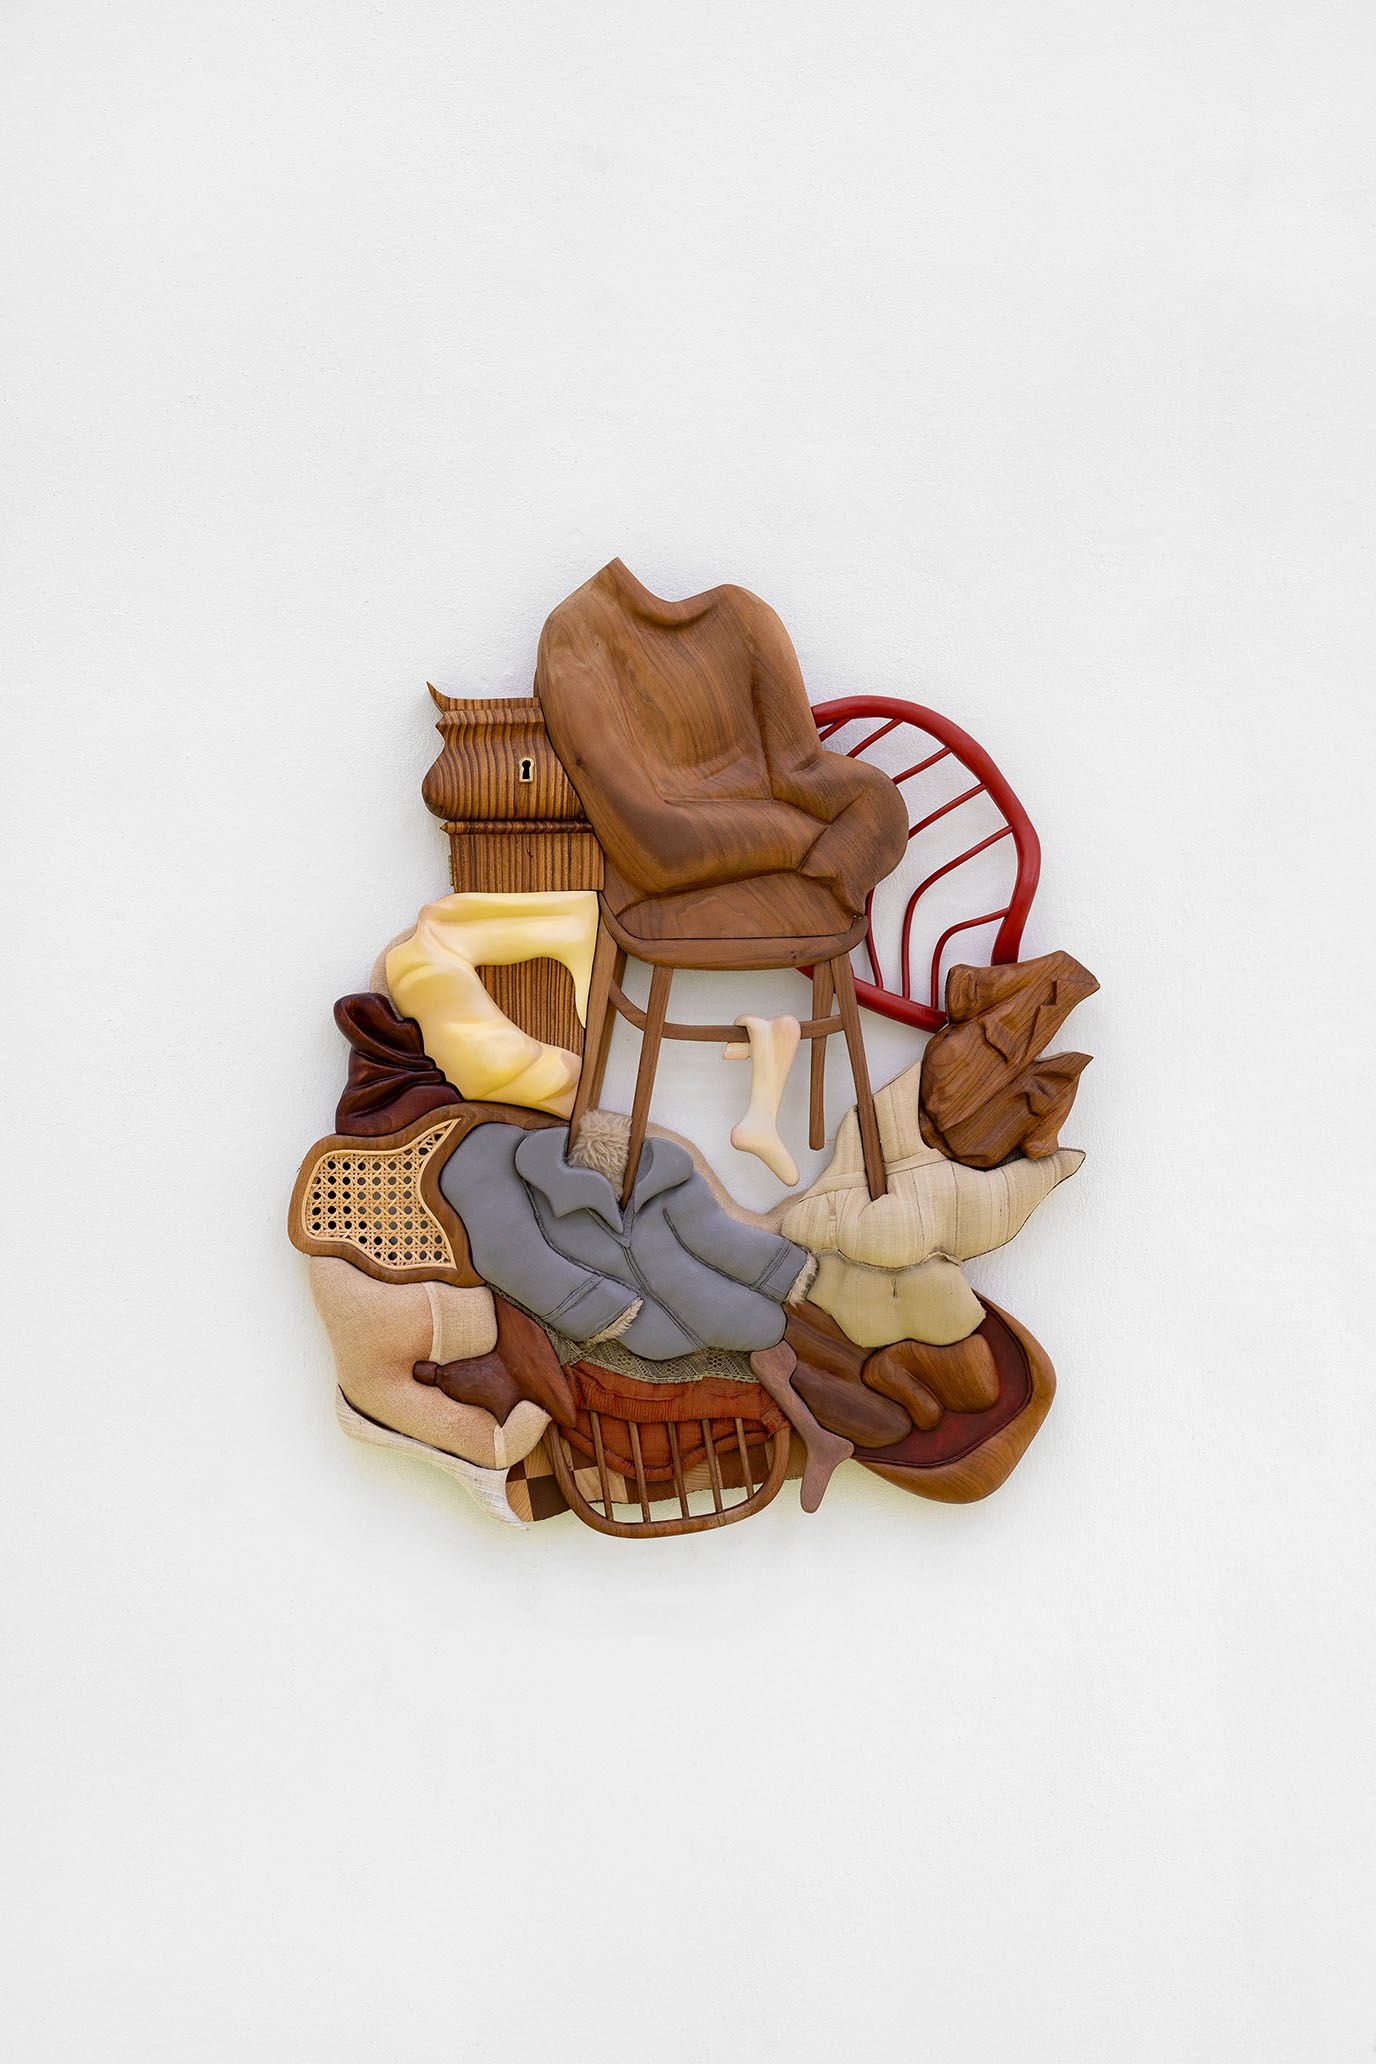 Tobas IZSÓ from the series "off the cuff“ #1, 2023 Textile, foam, horsehair, walnut, lime wood, willow, rattan, brass  80 x 70 x 5 cm Courtesy the artist and KOENIG2 by_robbygreif, Vienna 